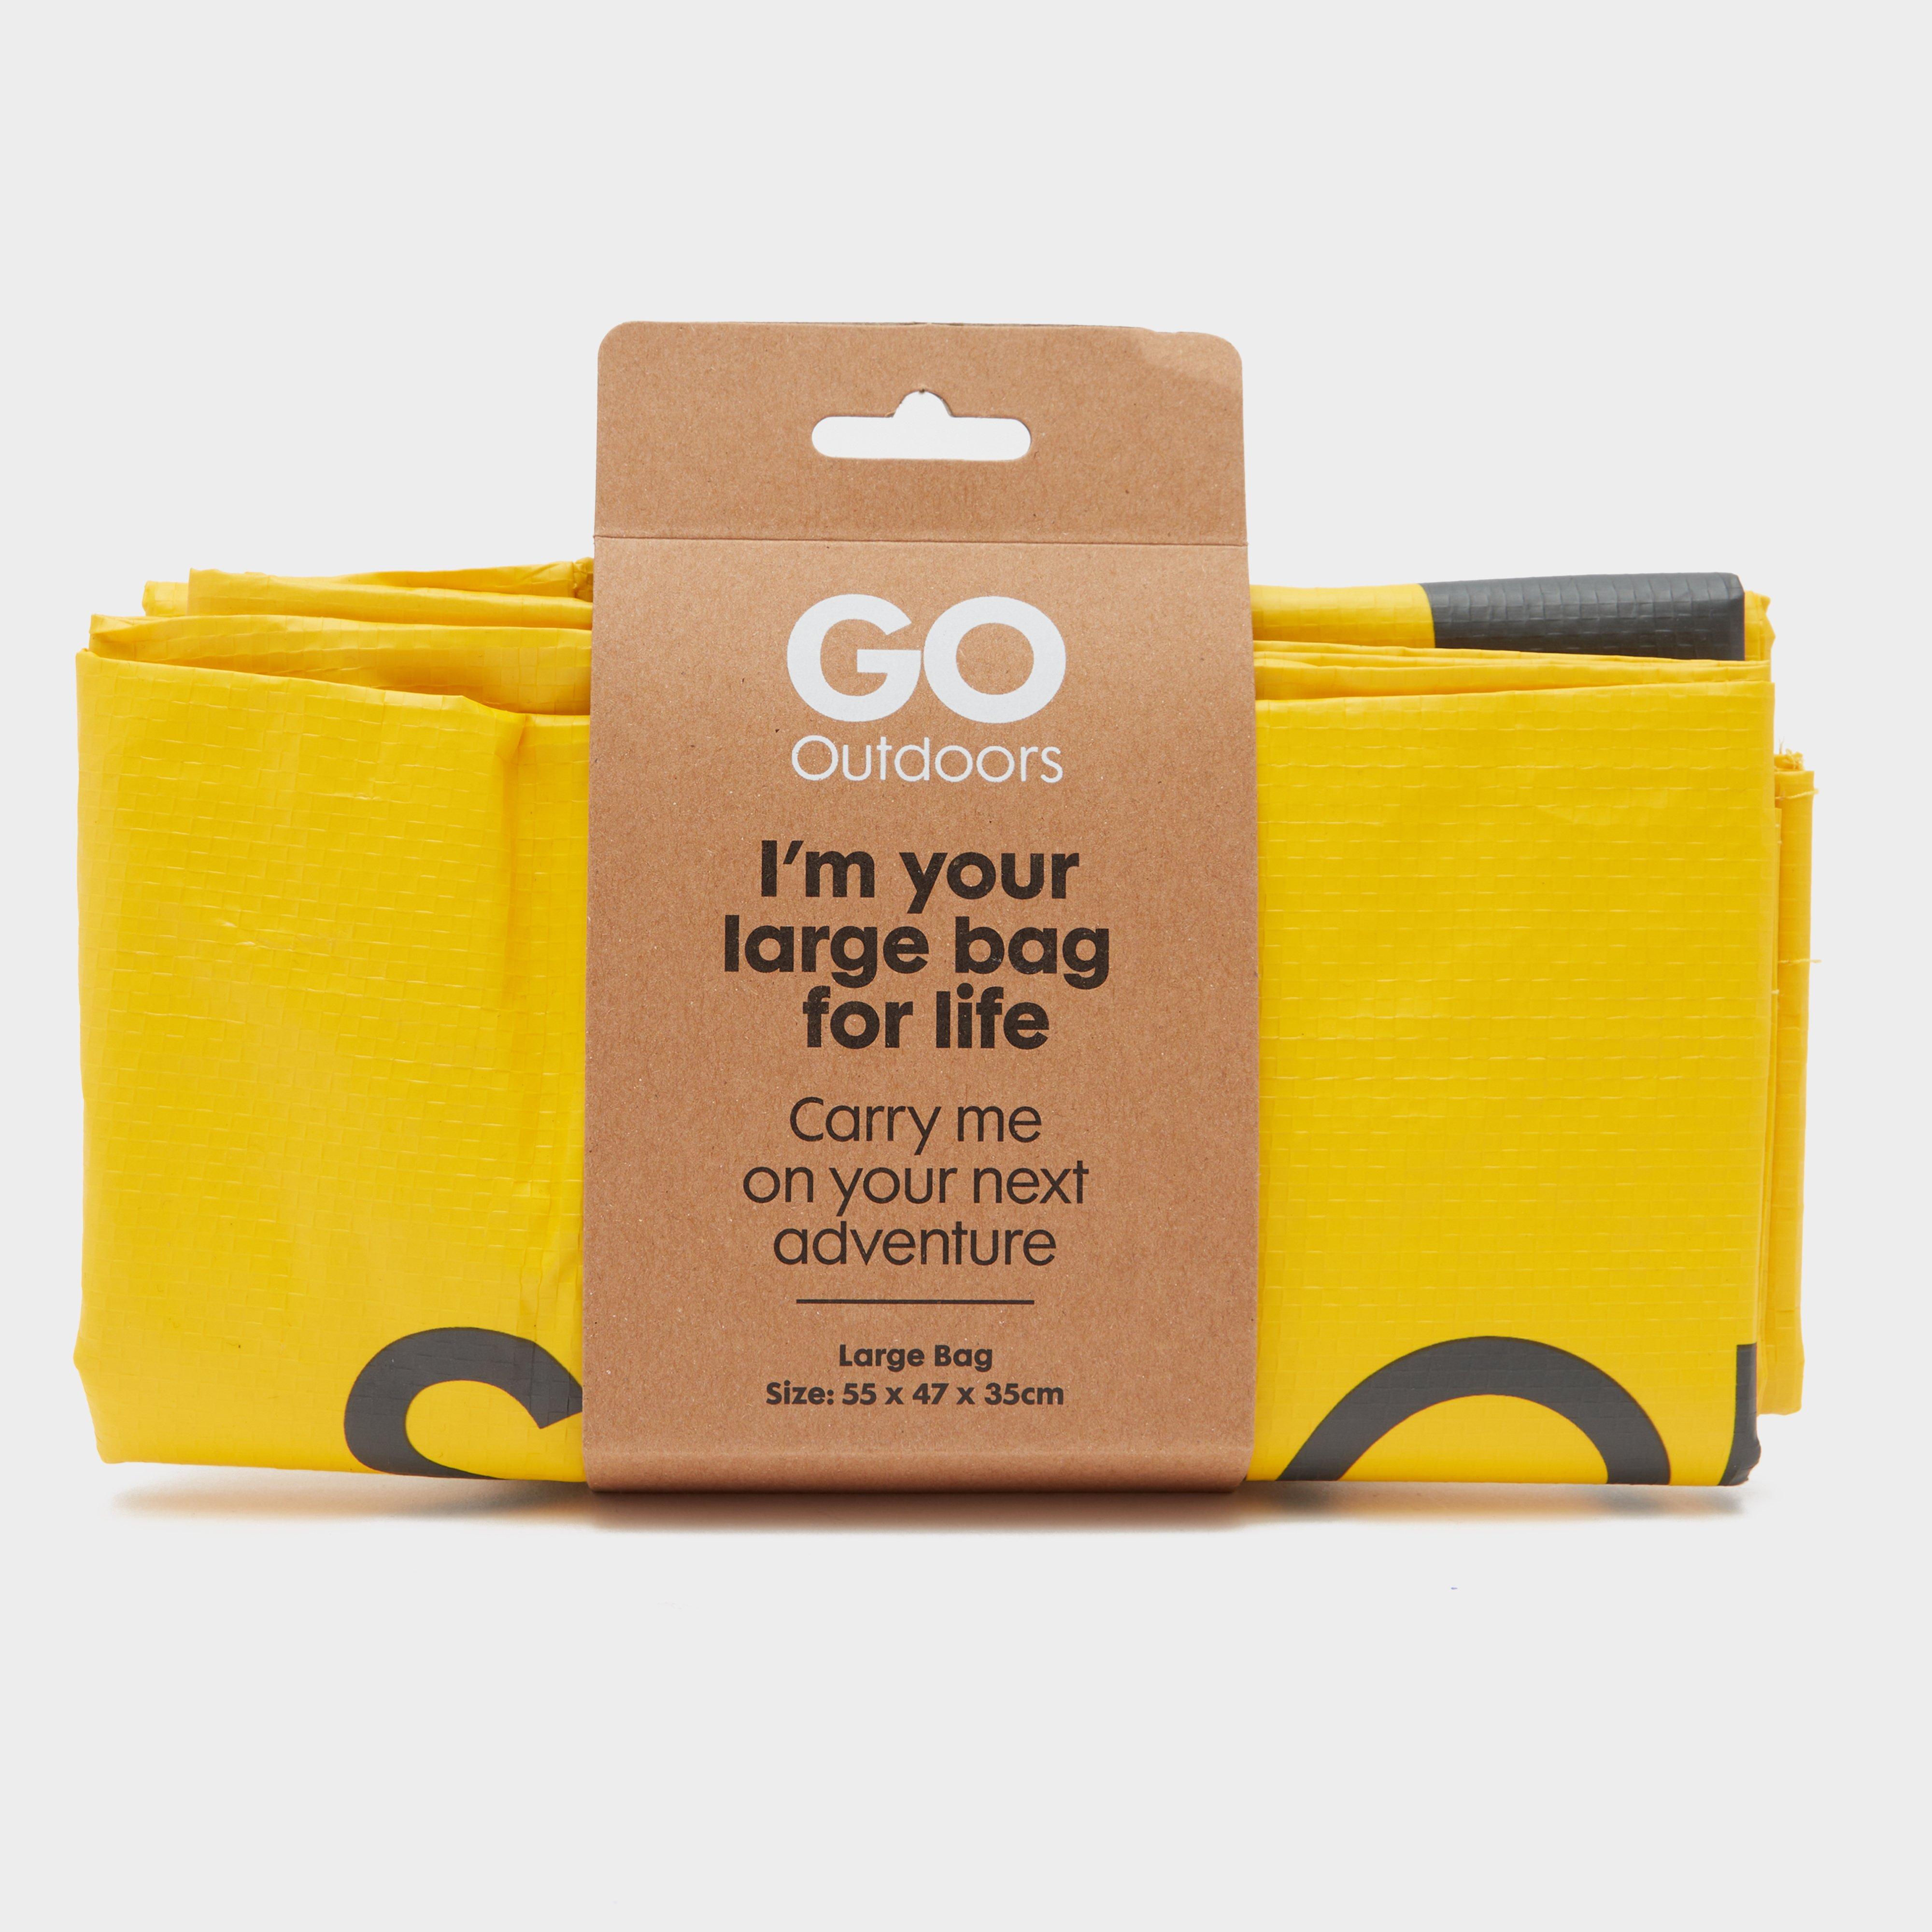 Go Outdoors GO OUTDOORS Large Bag For Life, Yellow